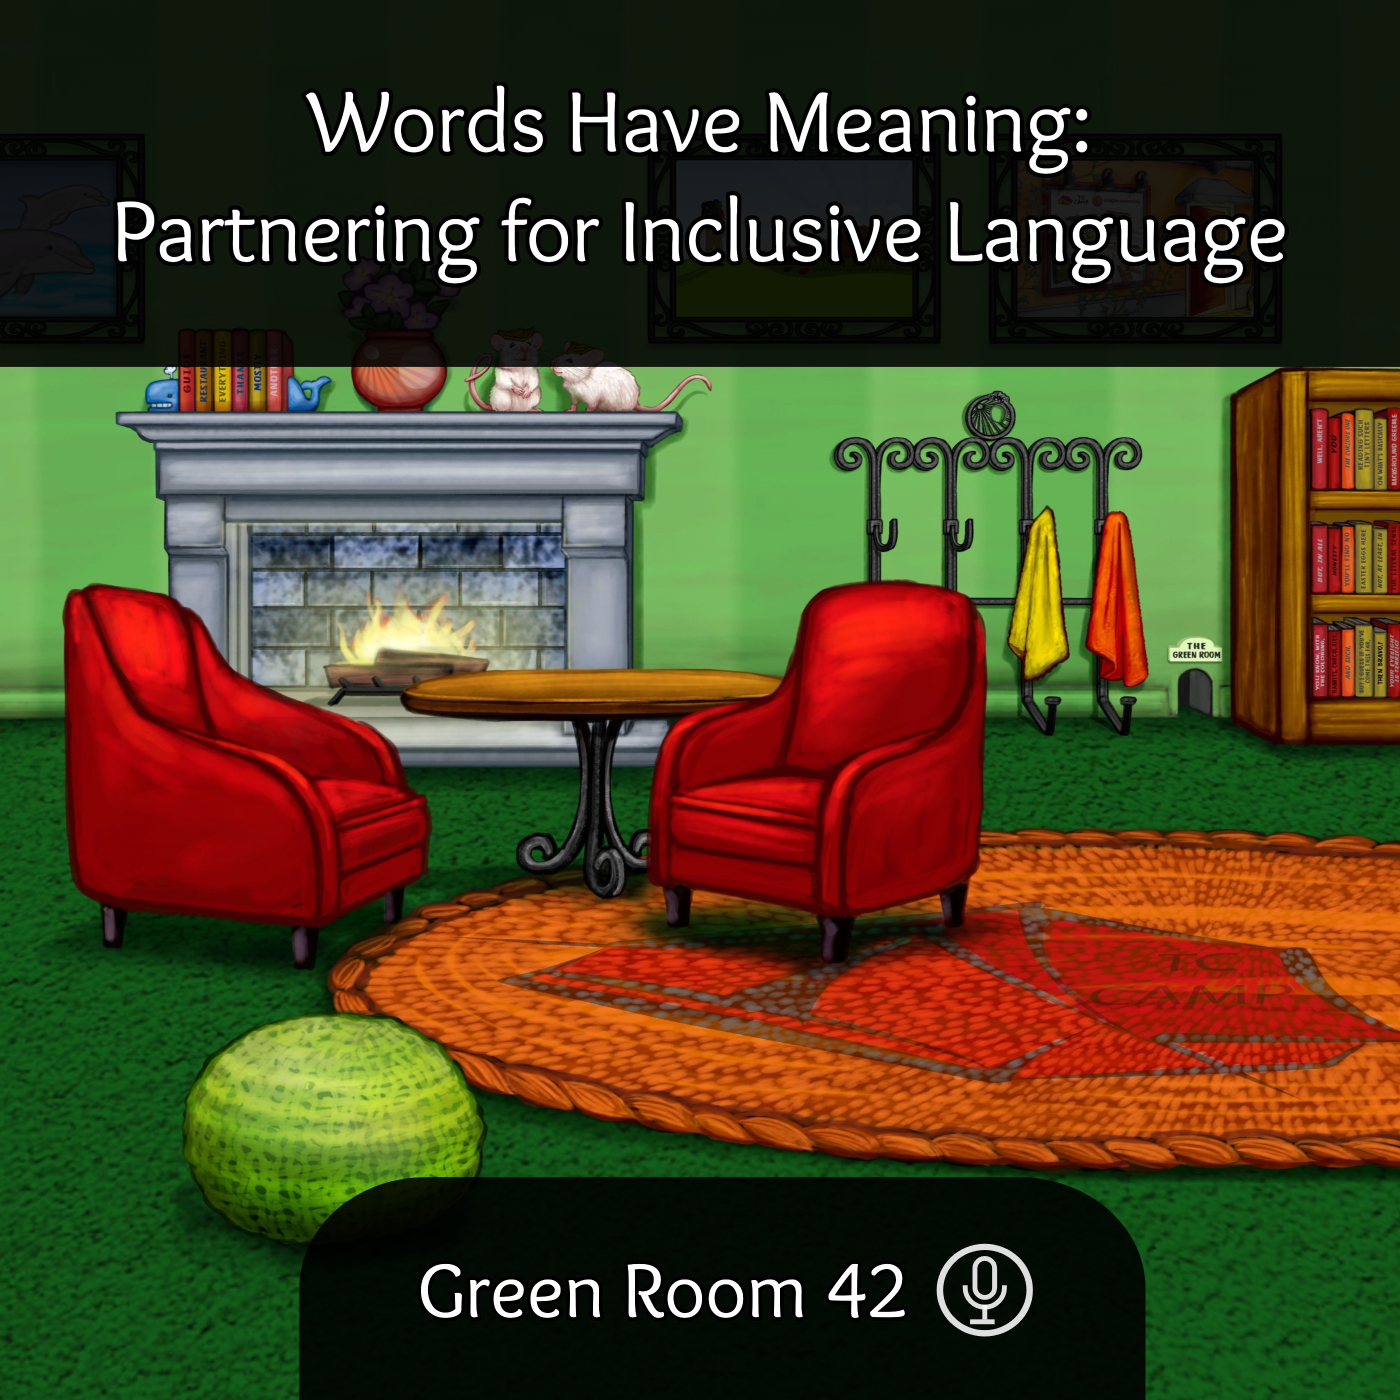 Words Have Meaning (Green Room 42)